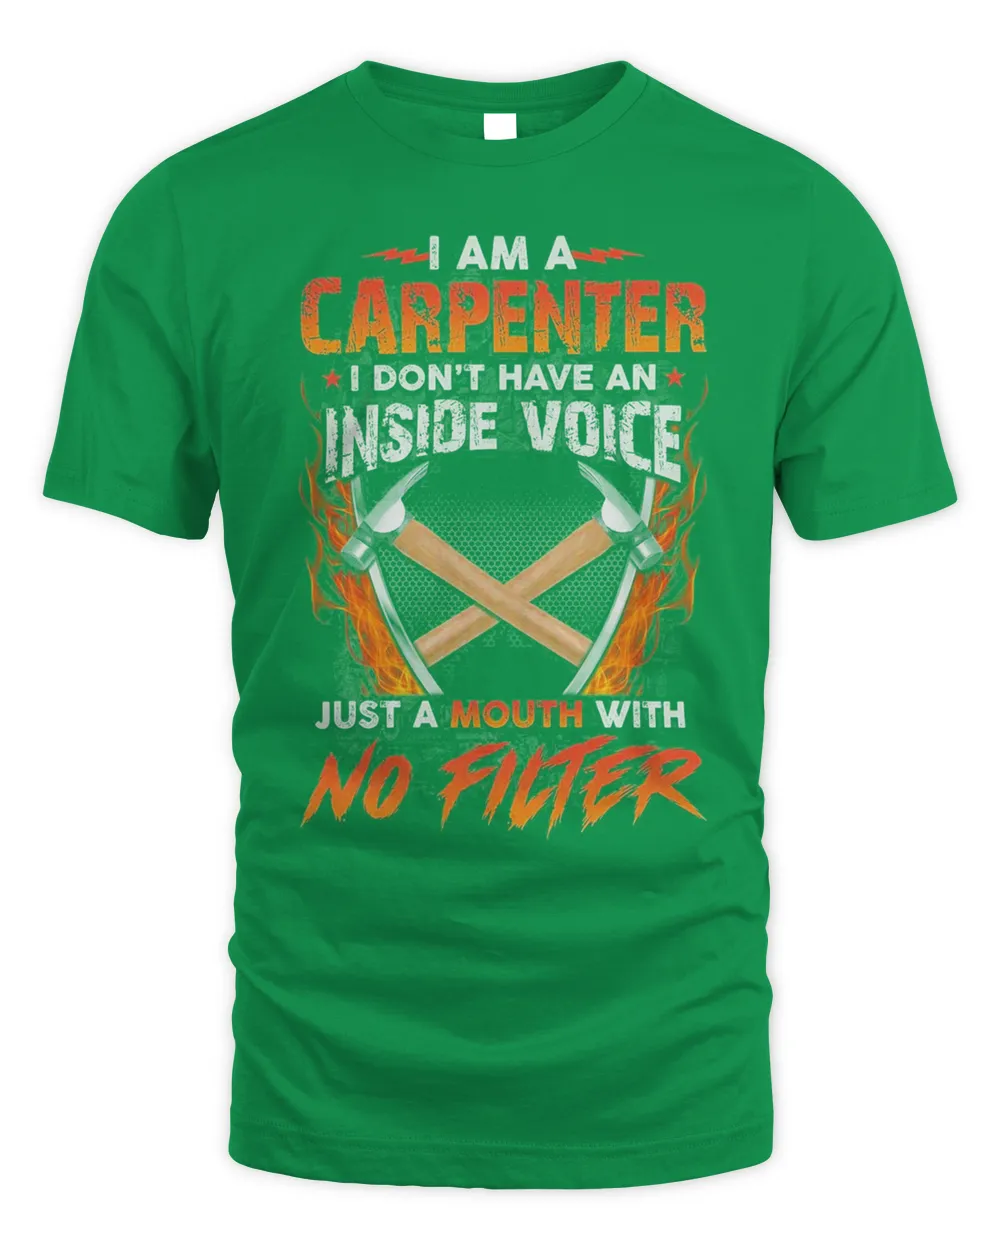 I Am A Carpenter I Don't Have An Inside Voice Just A Mouth With No Filter Shirt